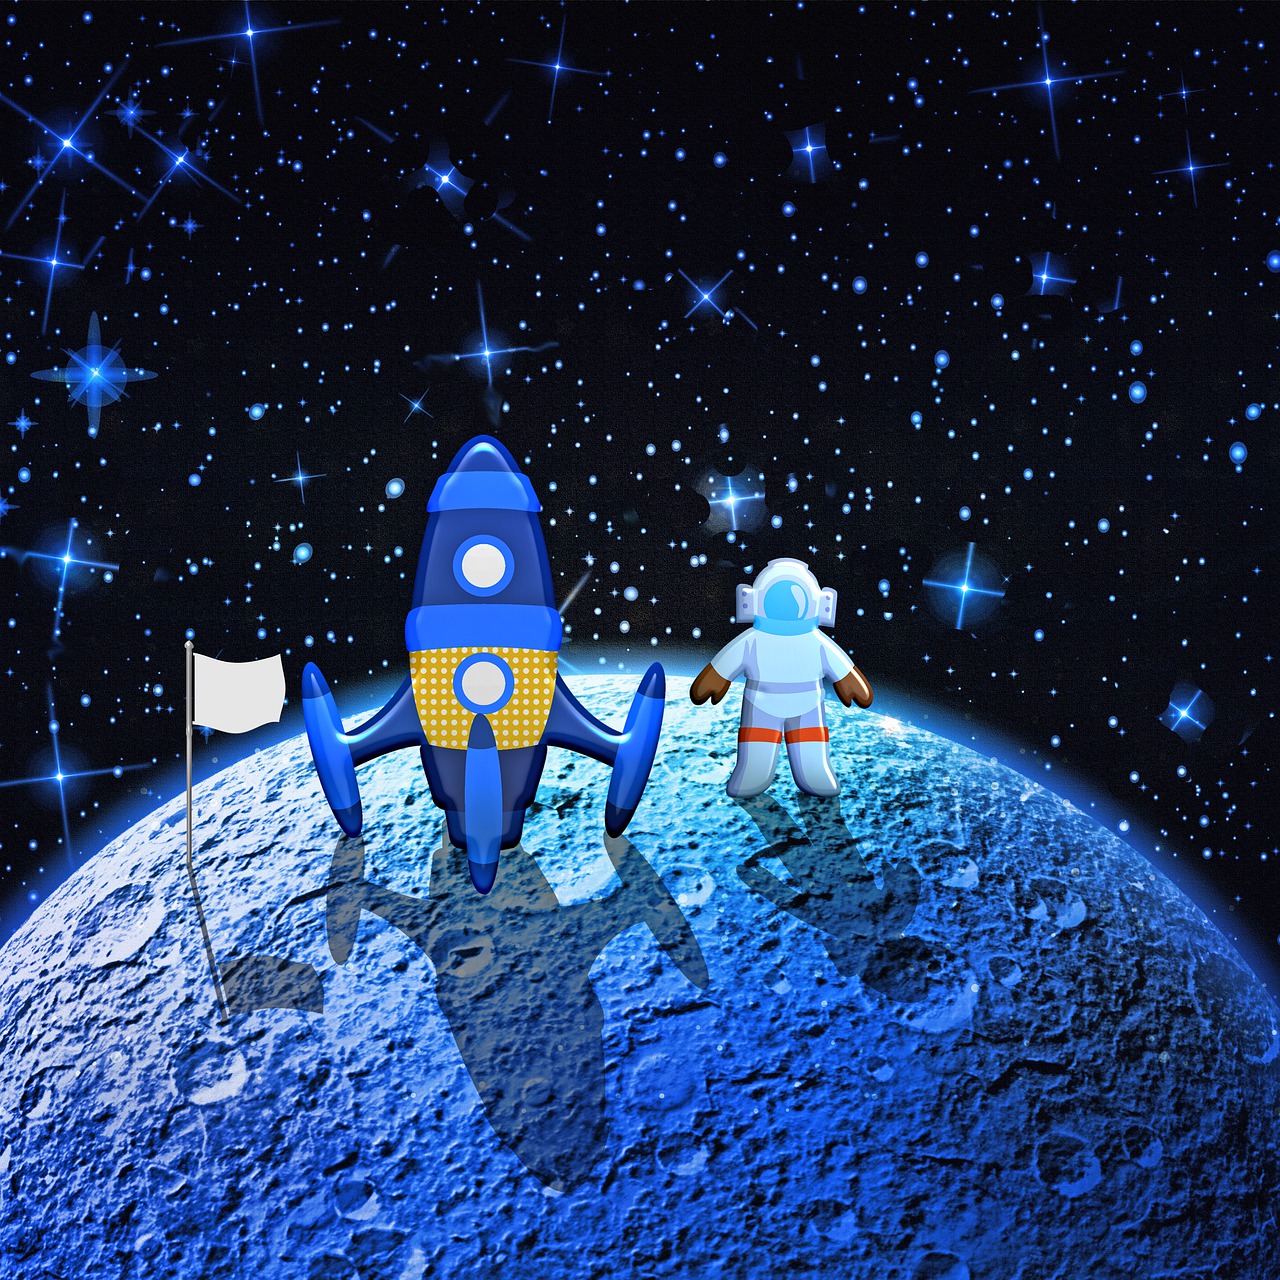 a couple of people standing on top of a blue planet, space art, toy commercial photo, moon surface background, tiny spaceship!!, army of robotic space penguins